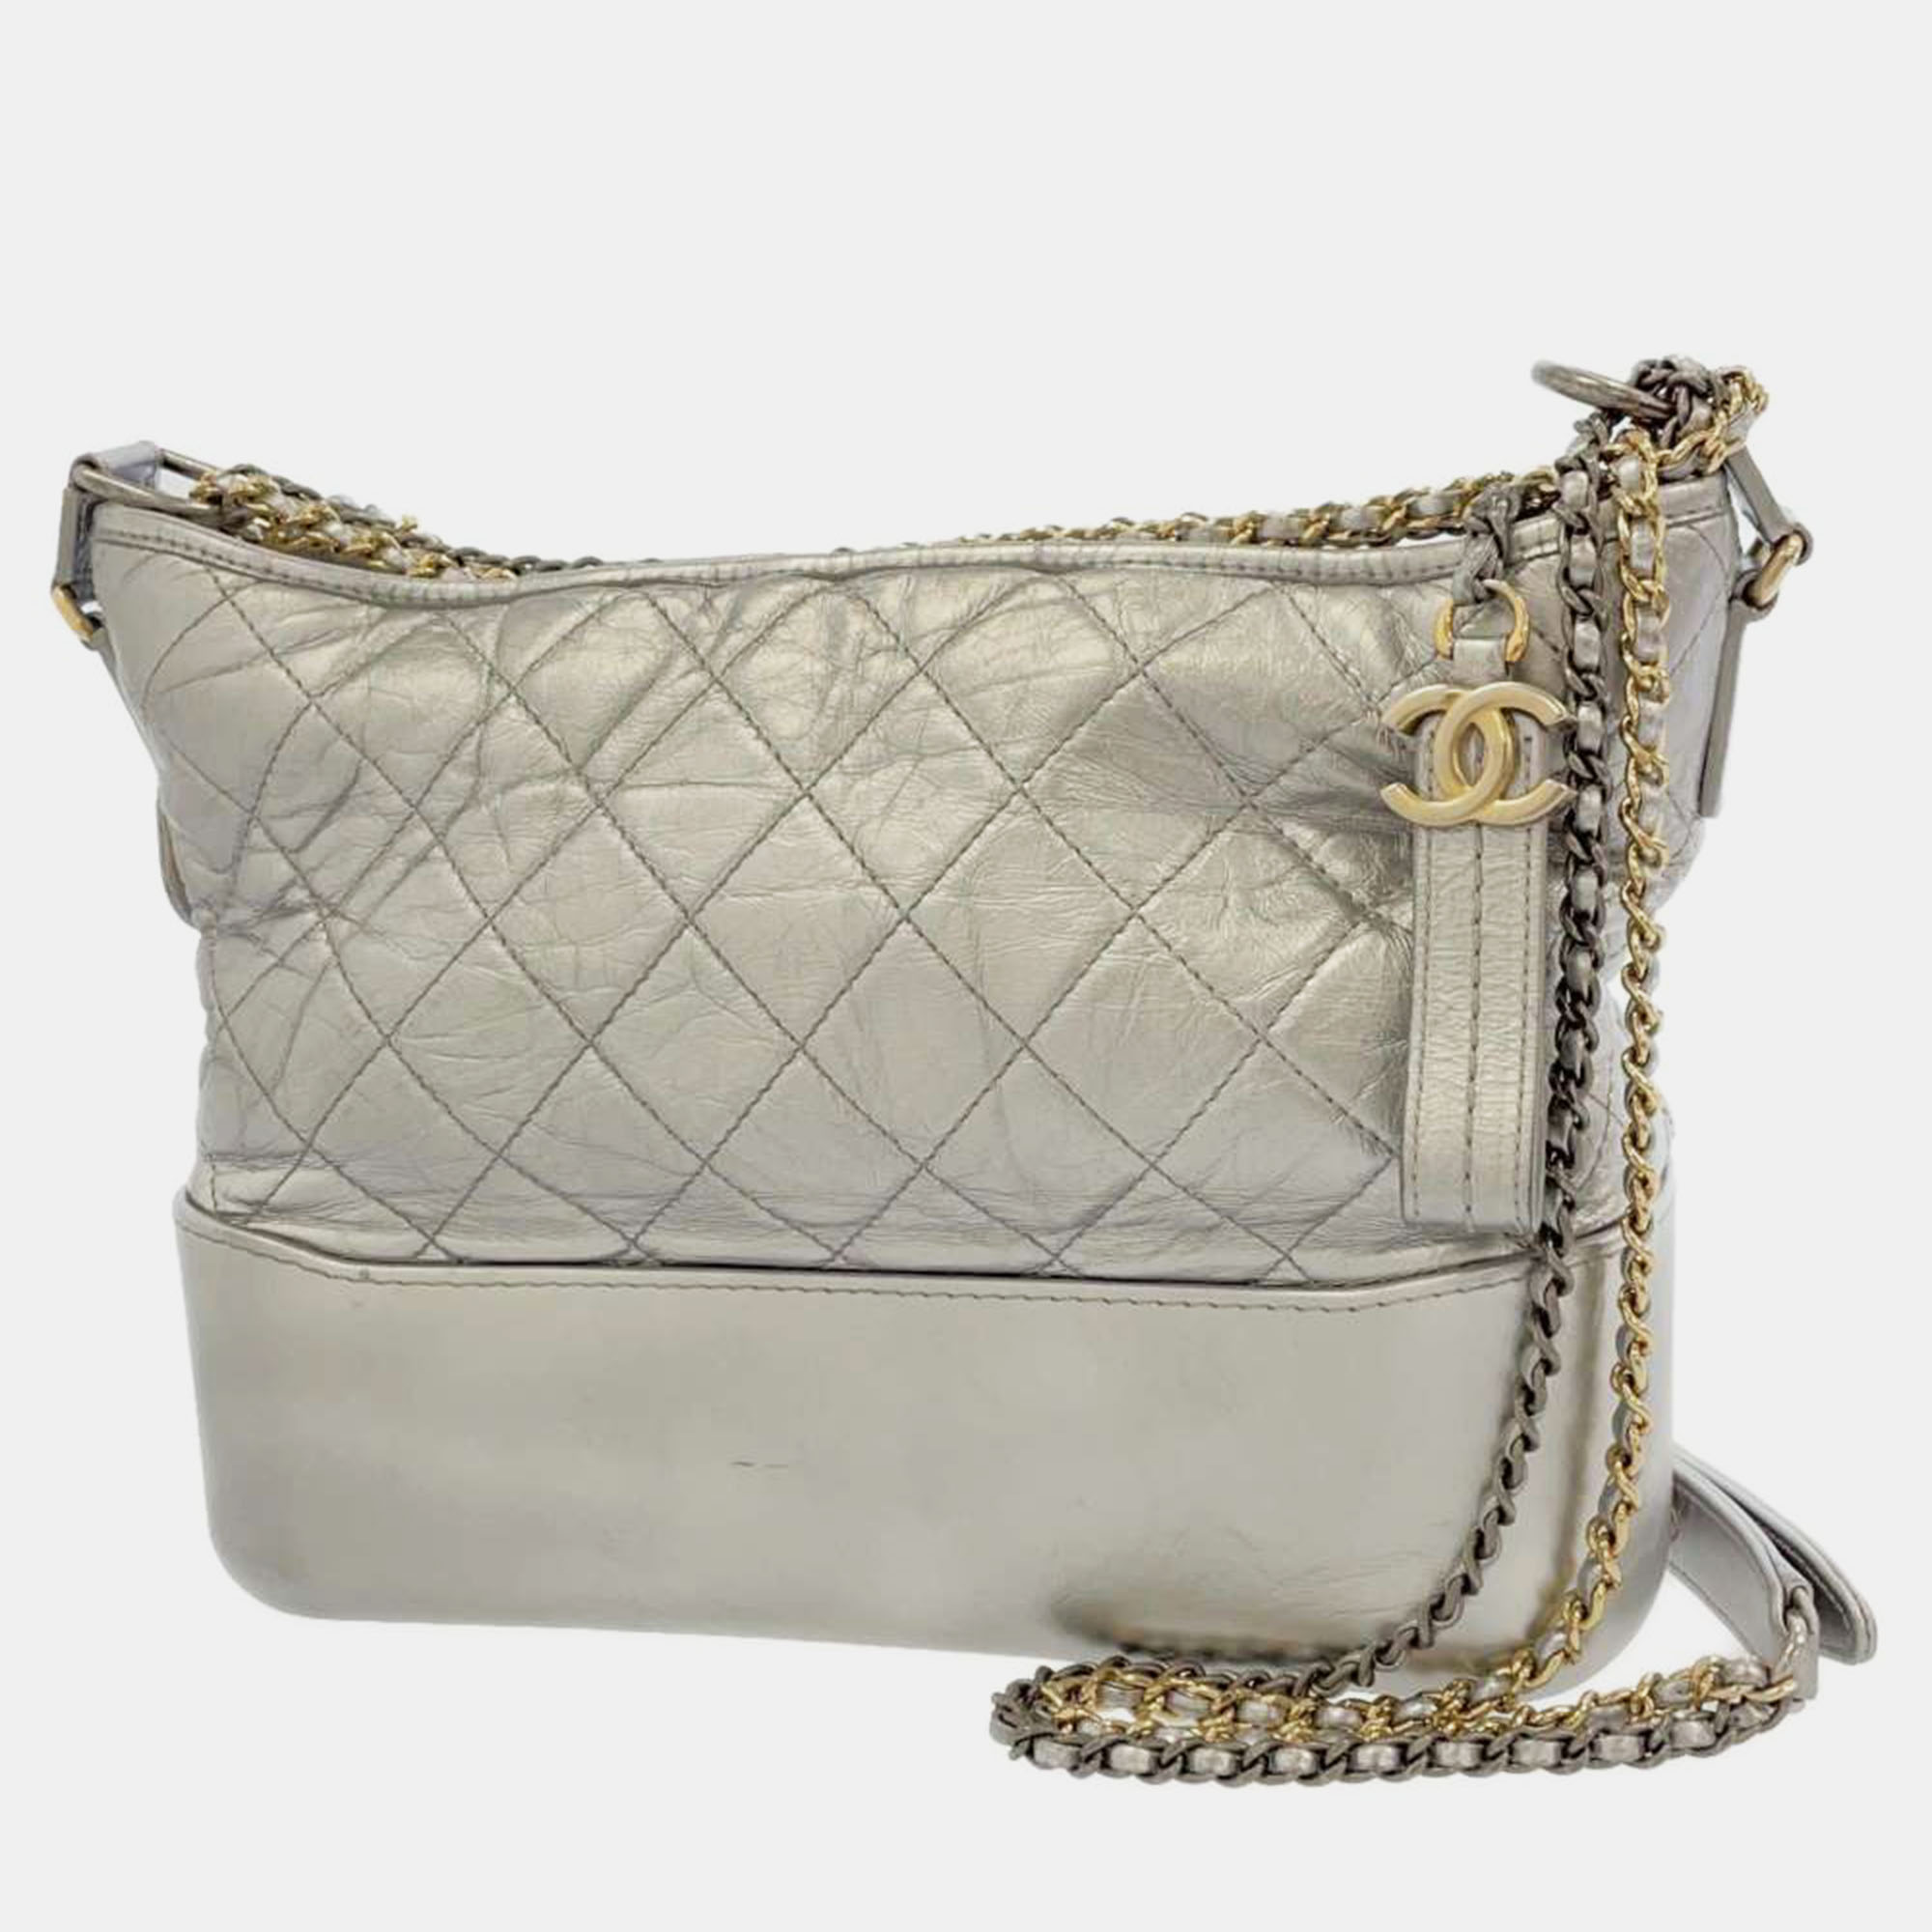 Chanel silver leather small gabrielle shoulder bag